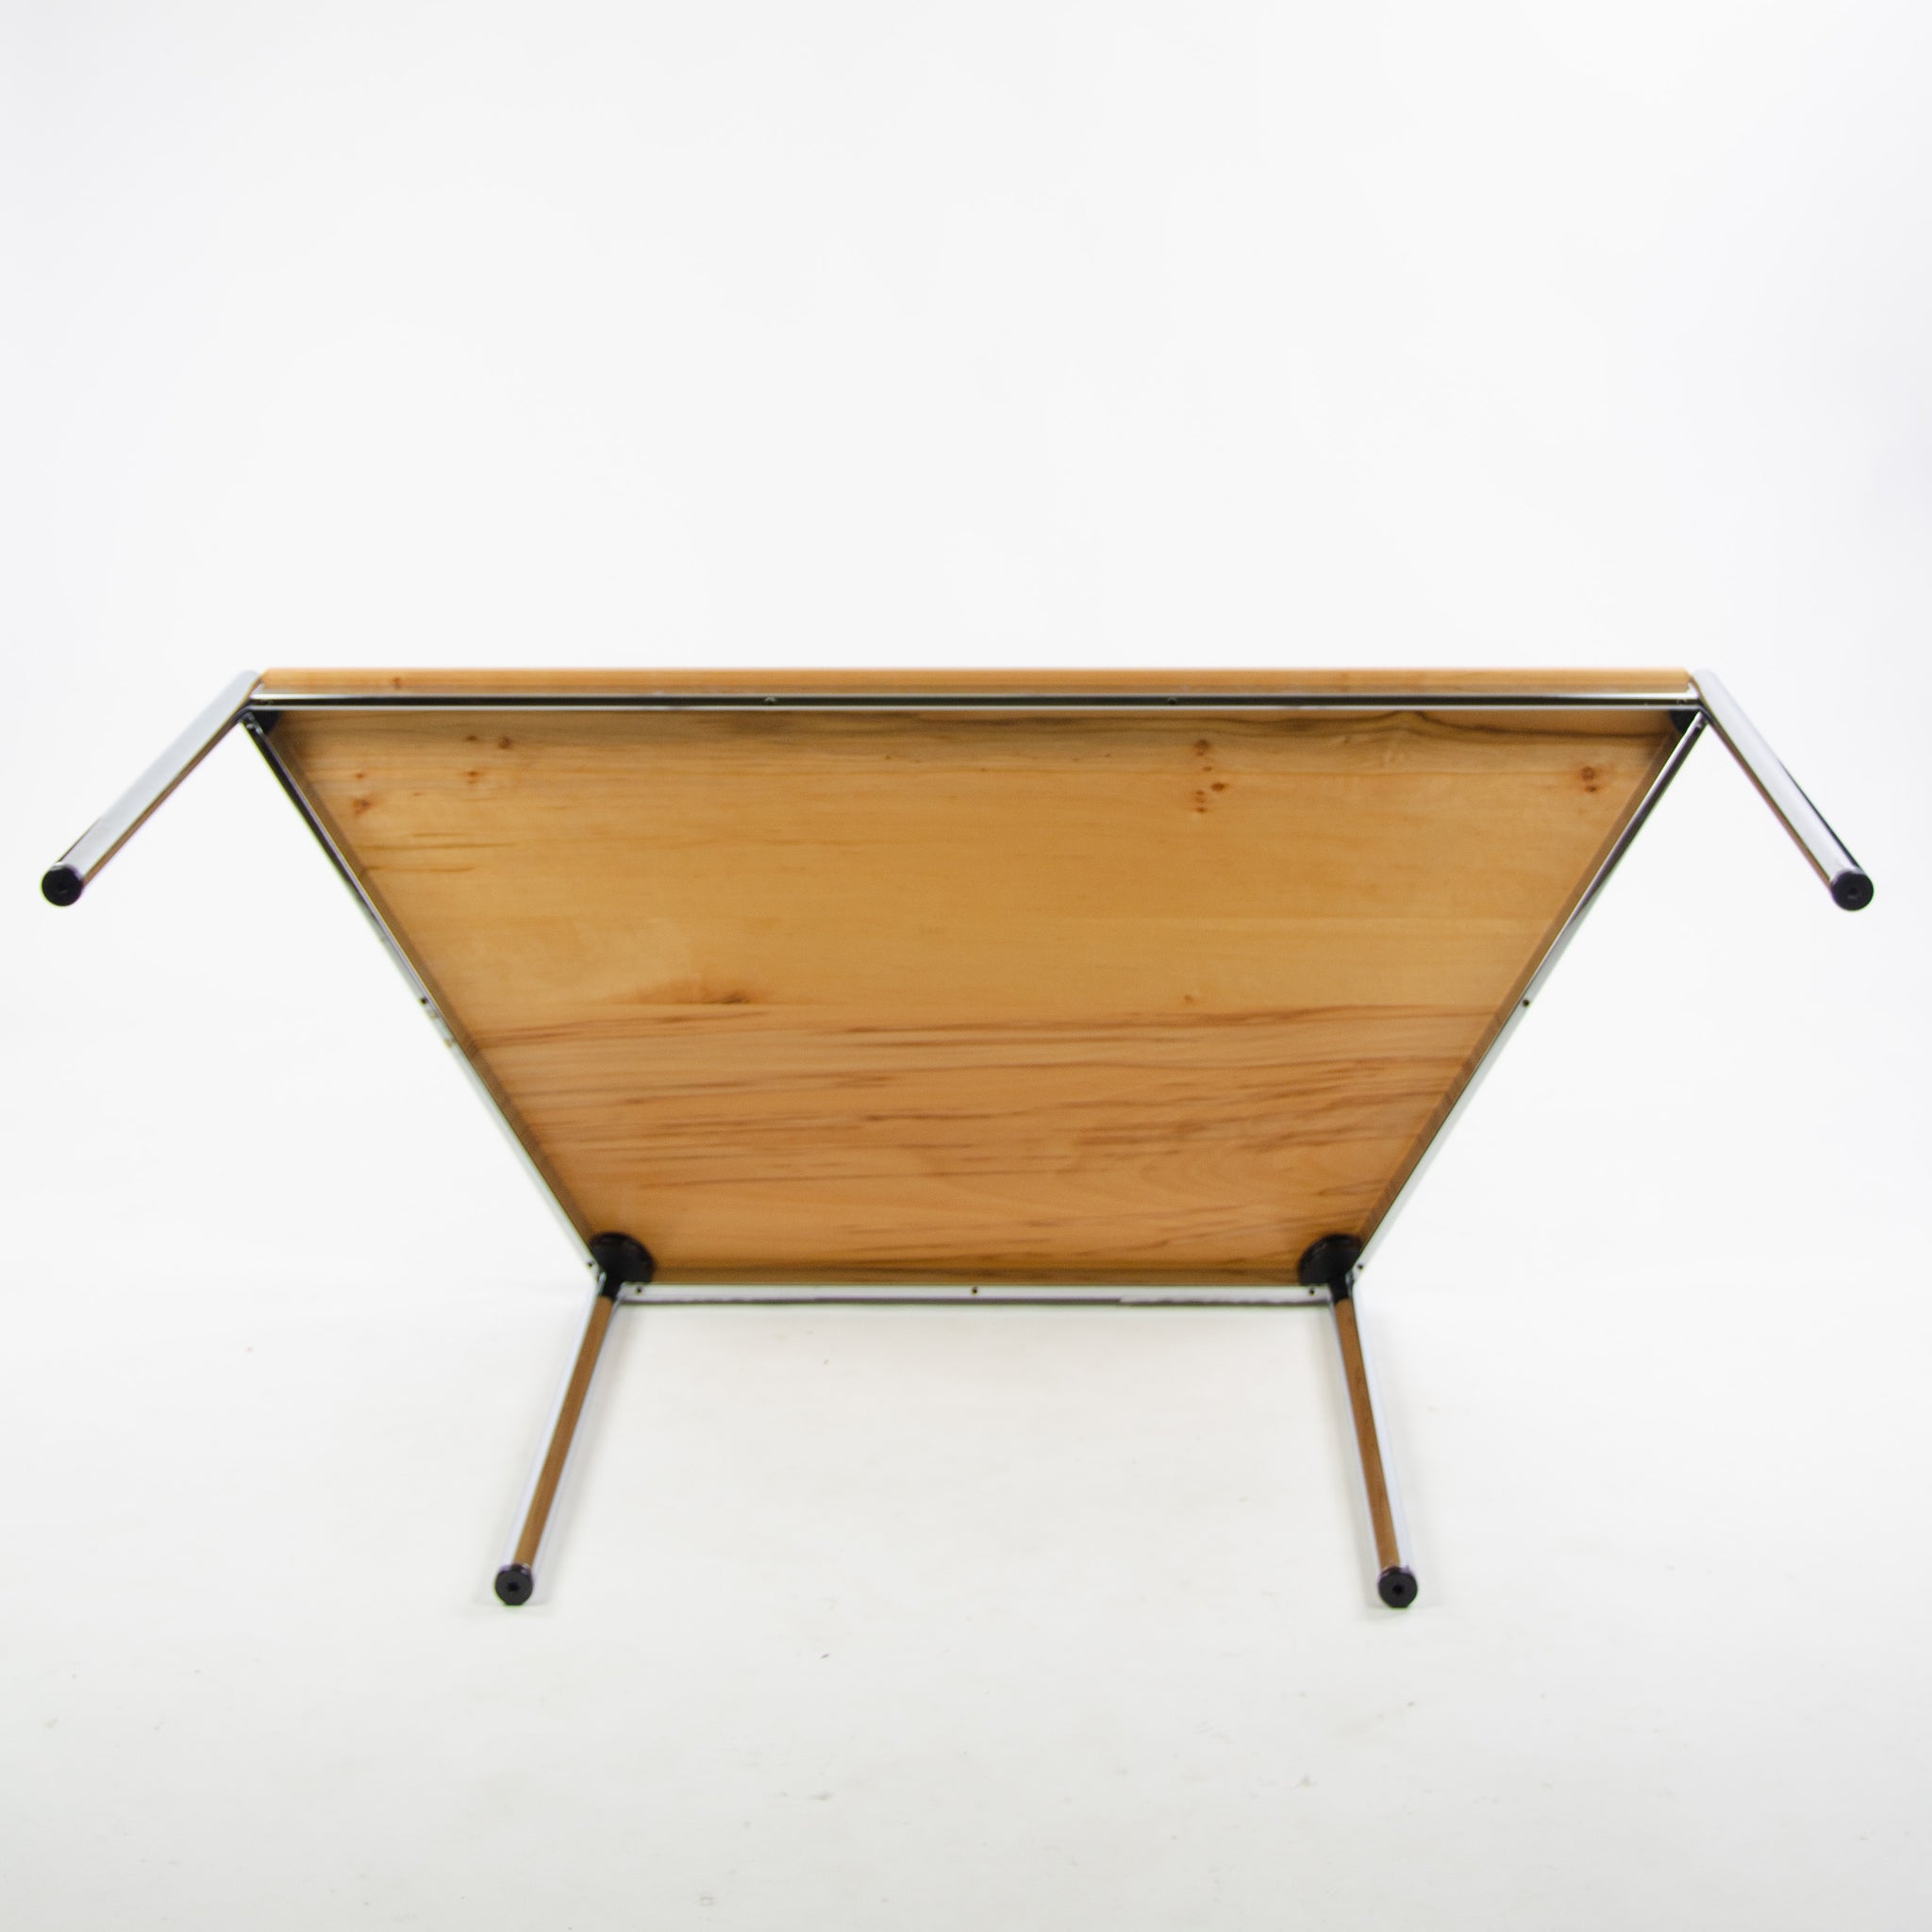 SOLD Fritz Haller USM Haller Beech Wood Trapezoid Table Modular 1500x740 Knoll Office Sets Available